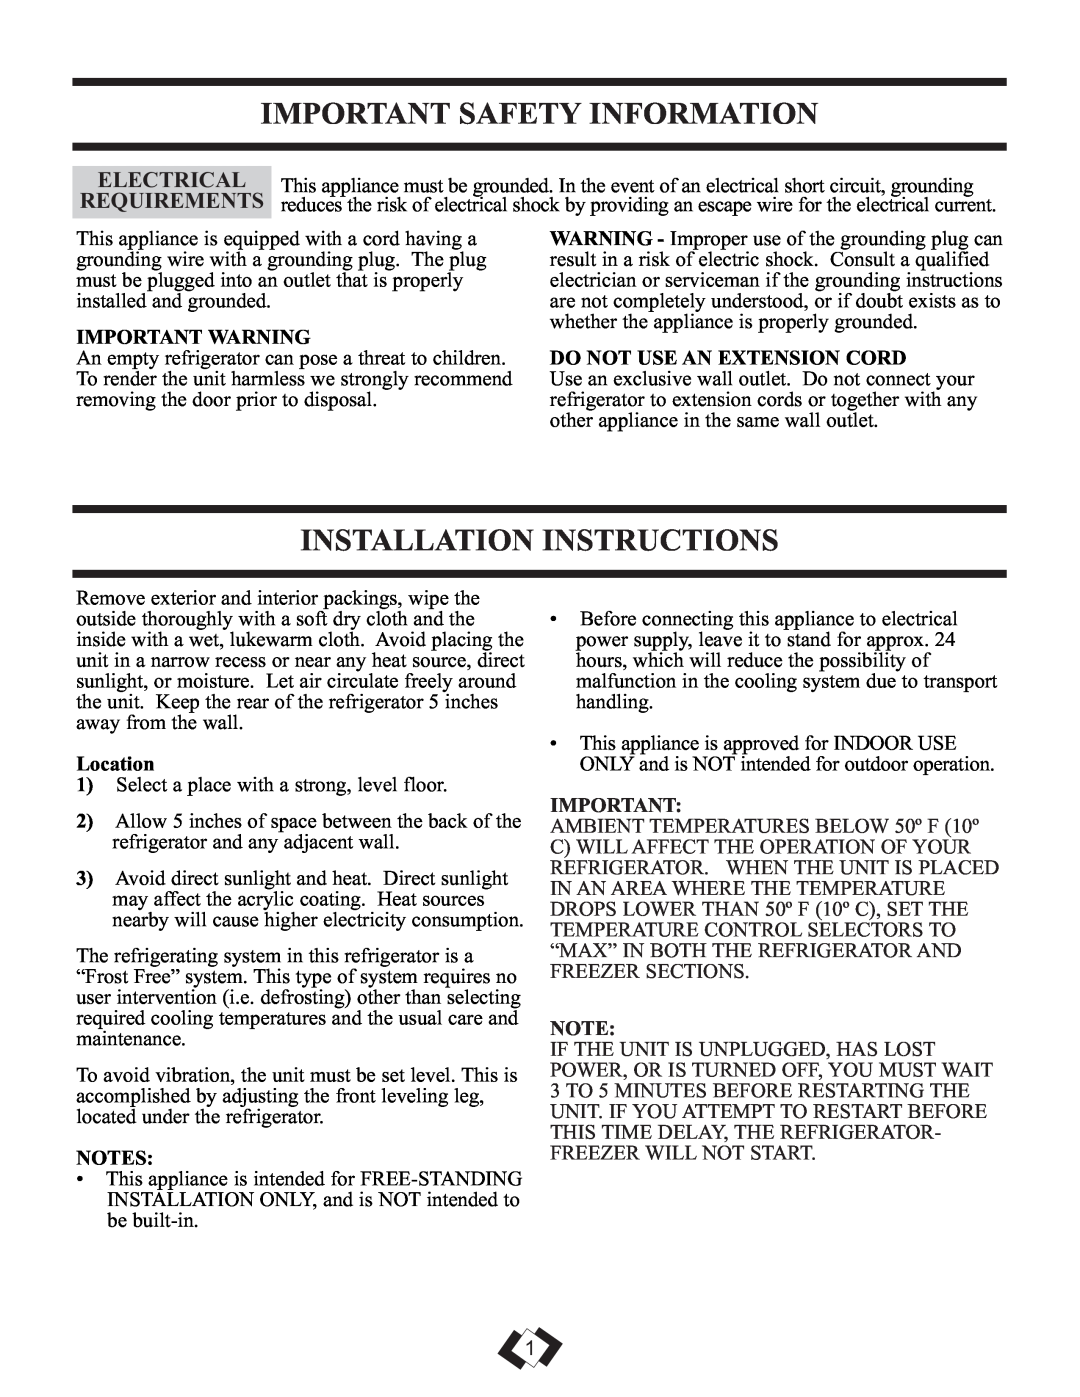 Danby DFF261WDB installation instructions Important Safety Information, Installation Instructions, Electrical, Requirements 